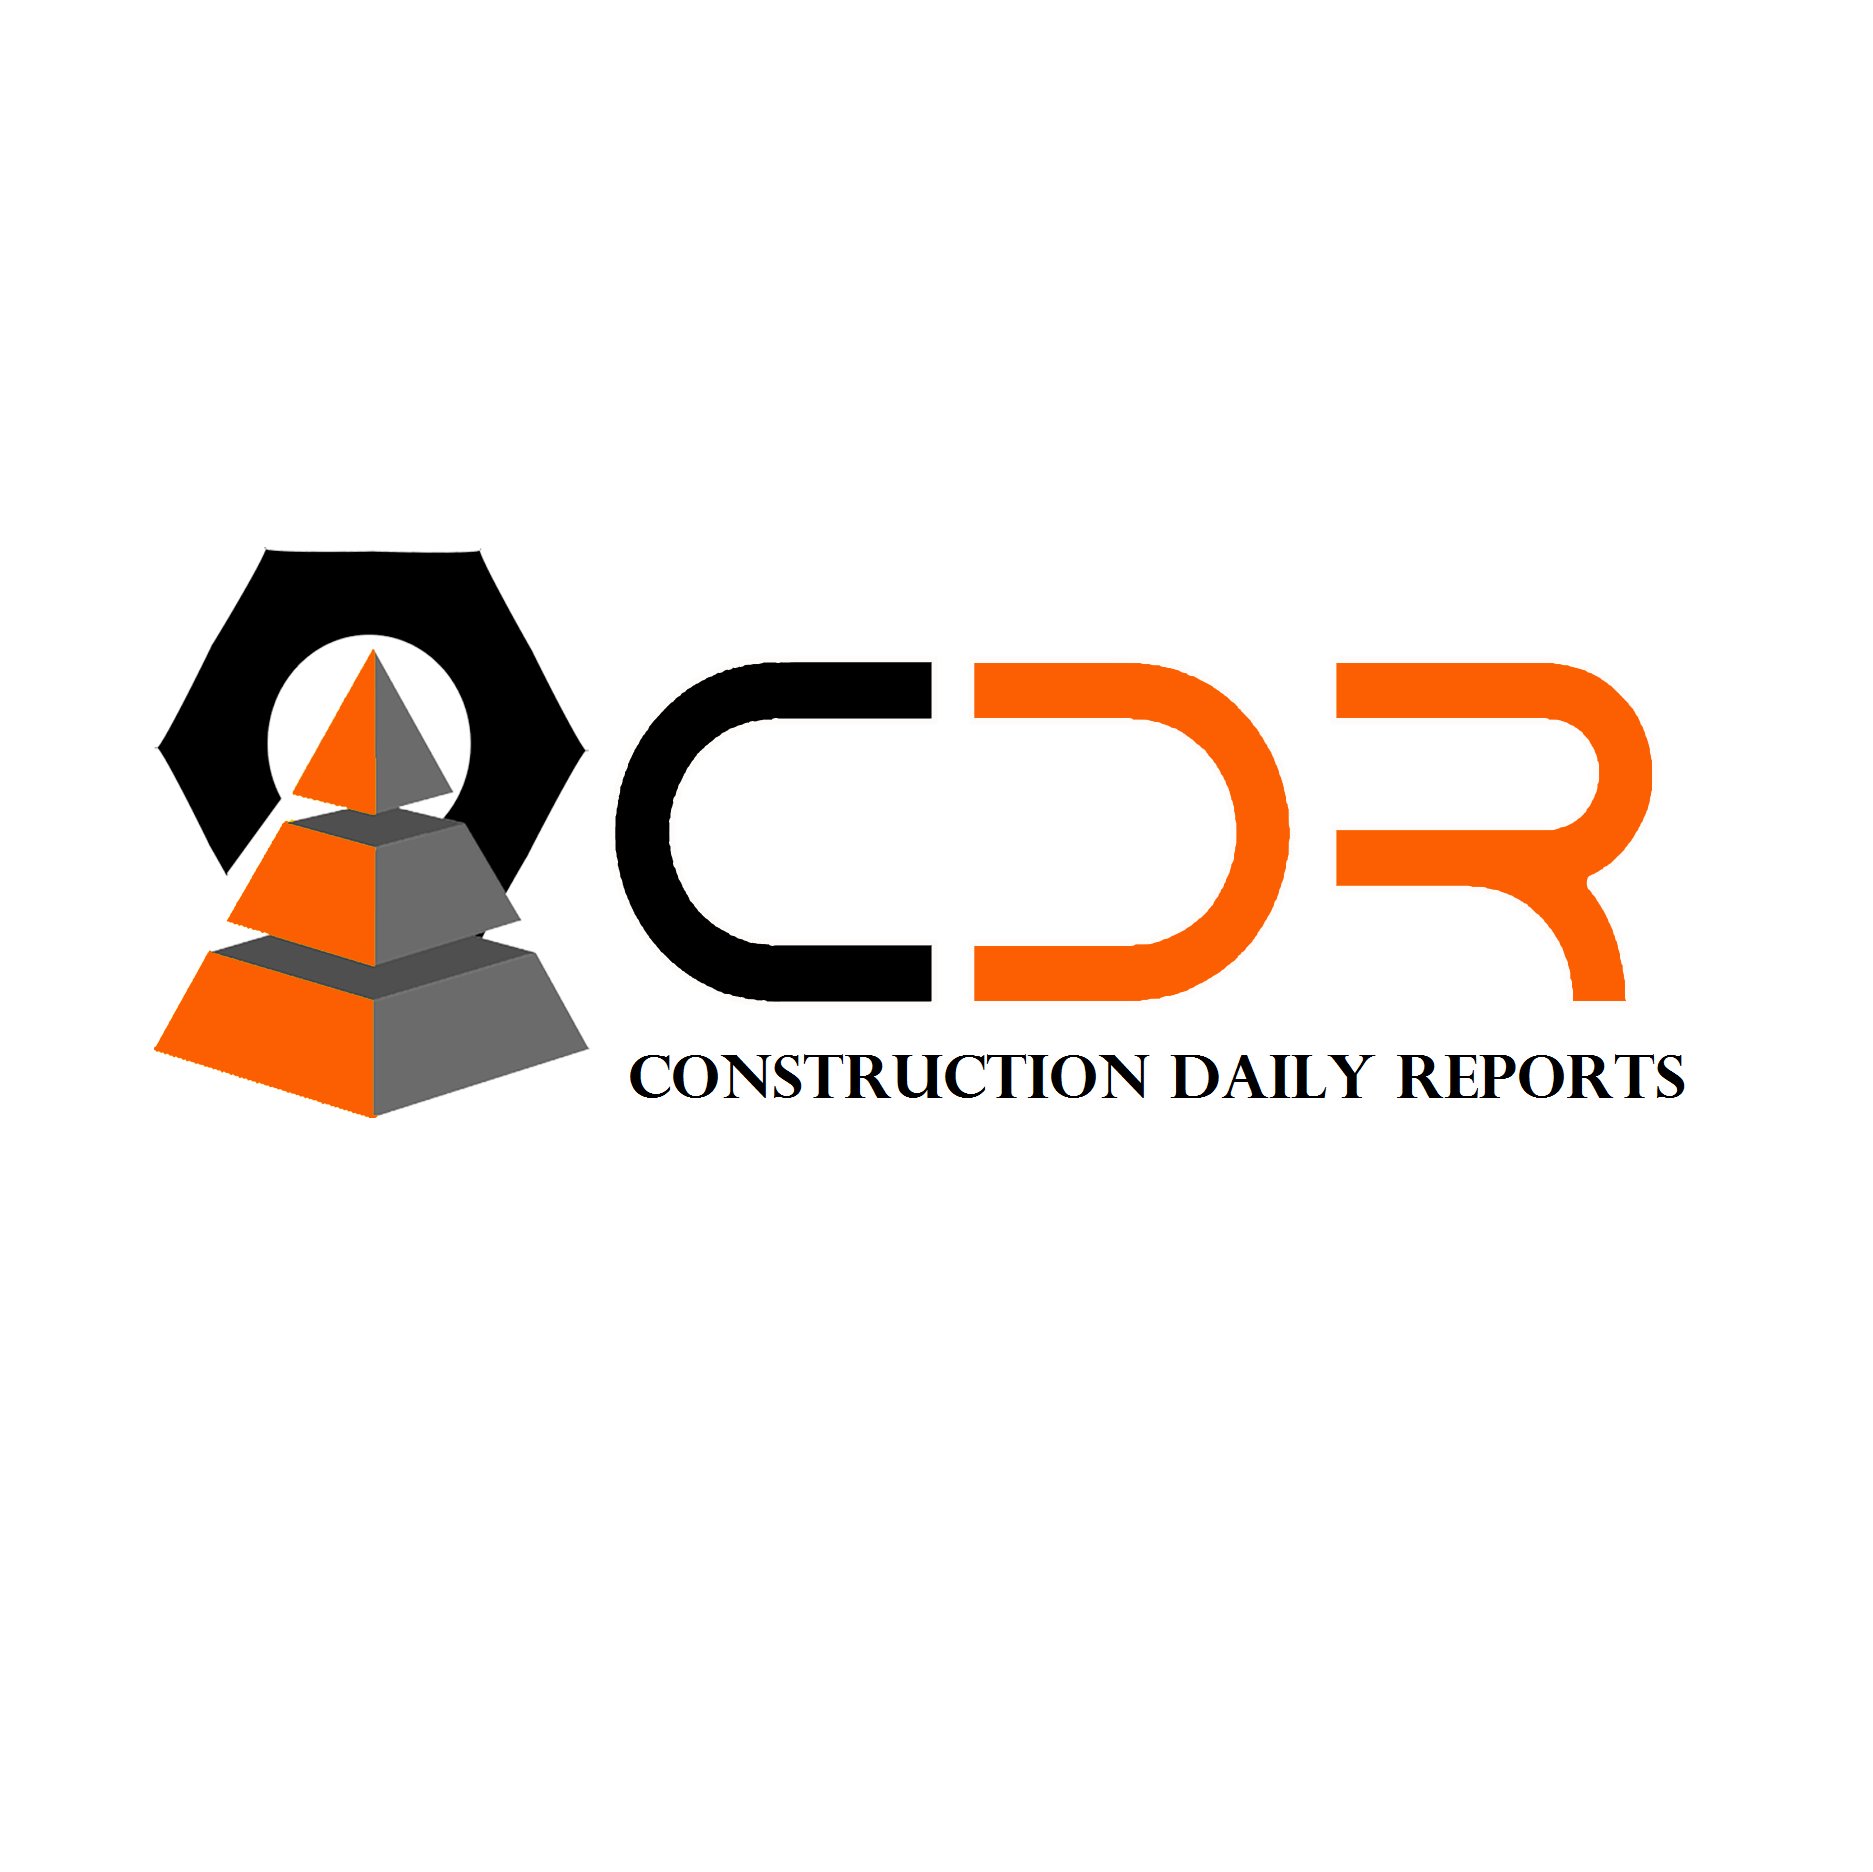 Our goal is to make daily reporting on the construction site easy. Daily reports do not have to take an hour a day. Automate your process!